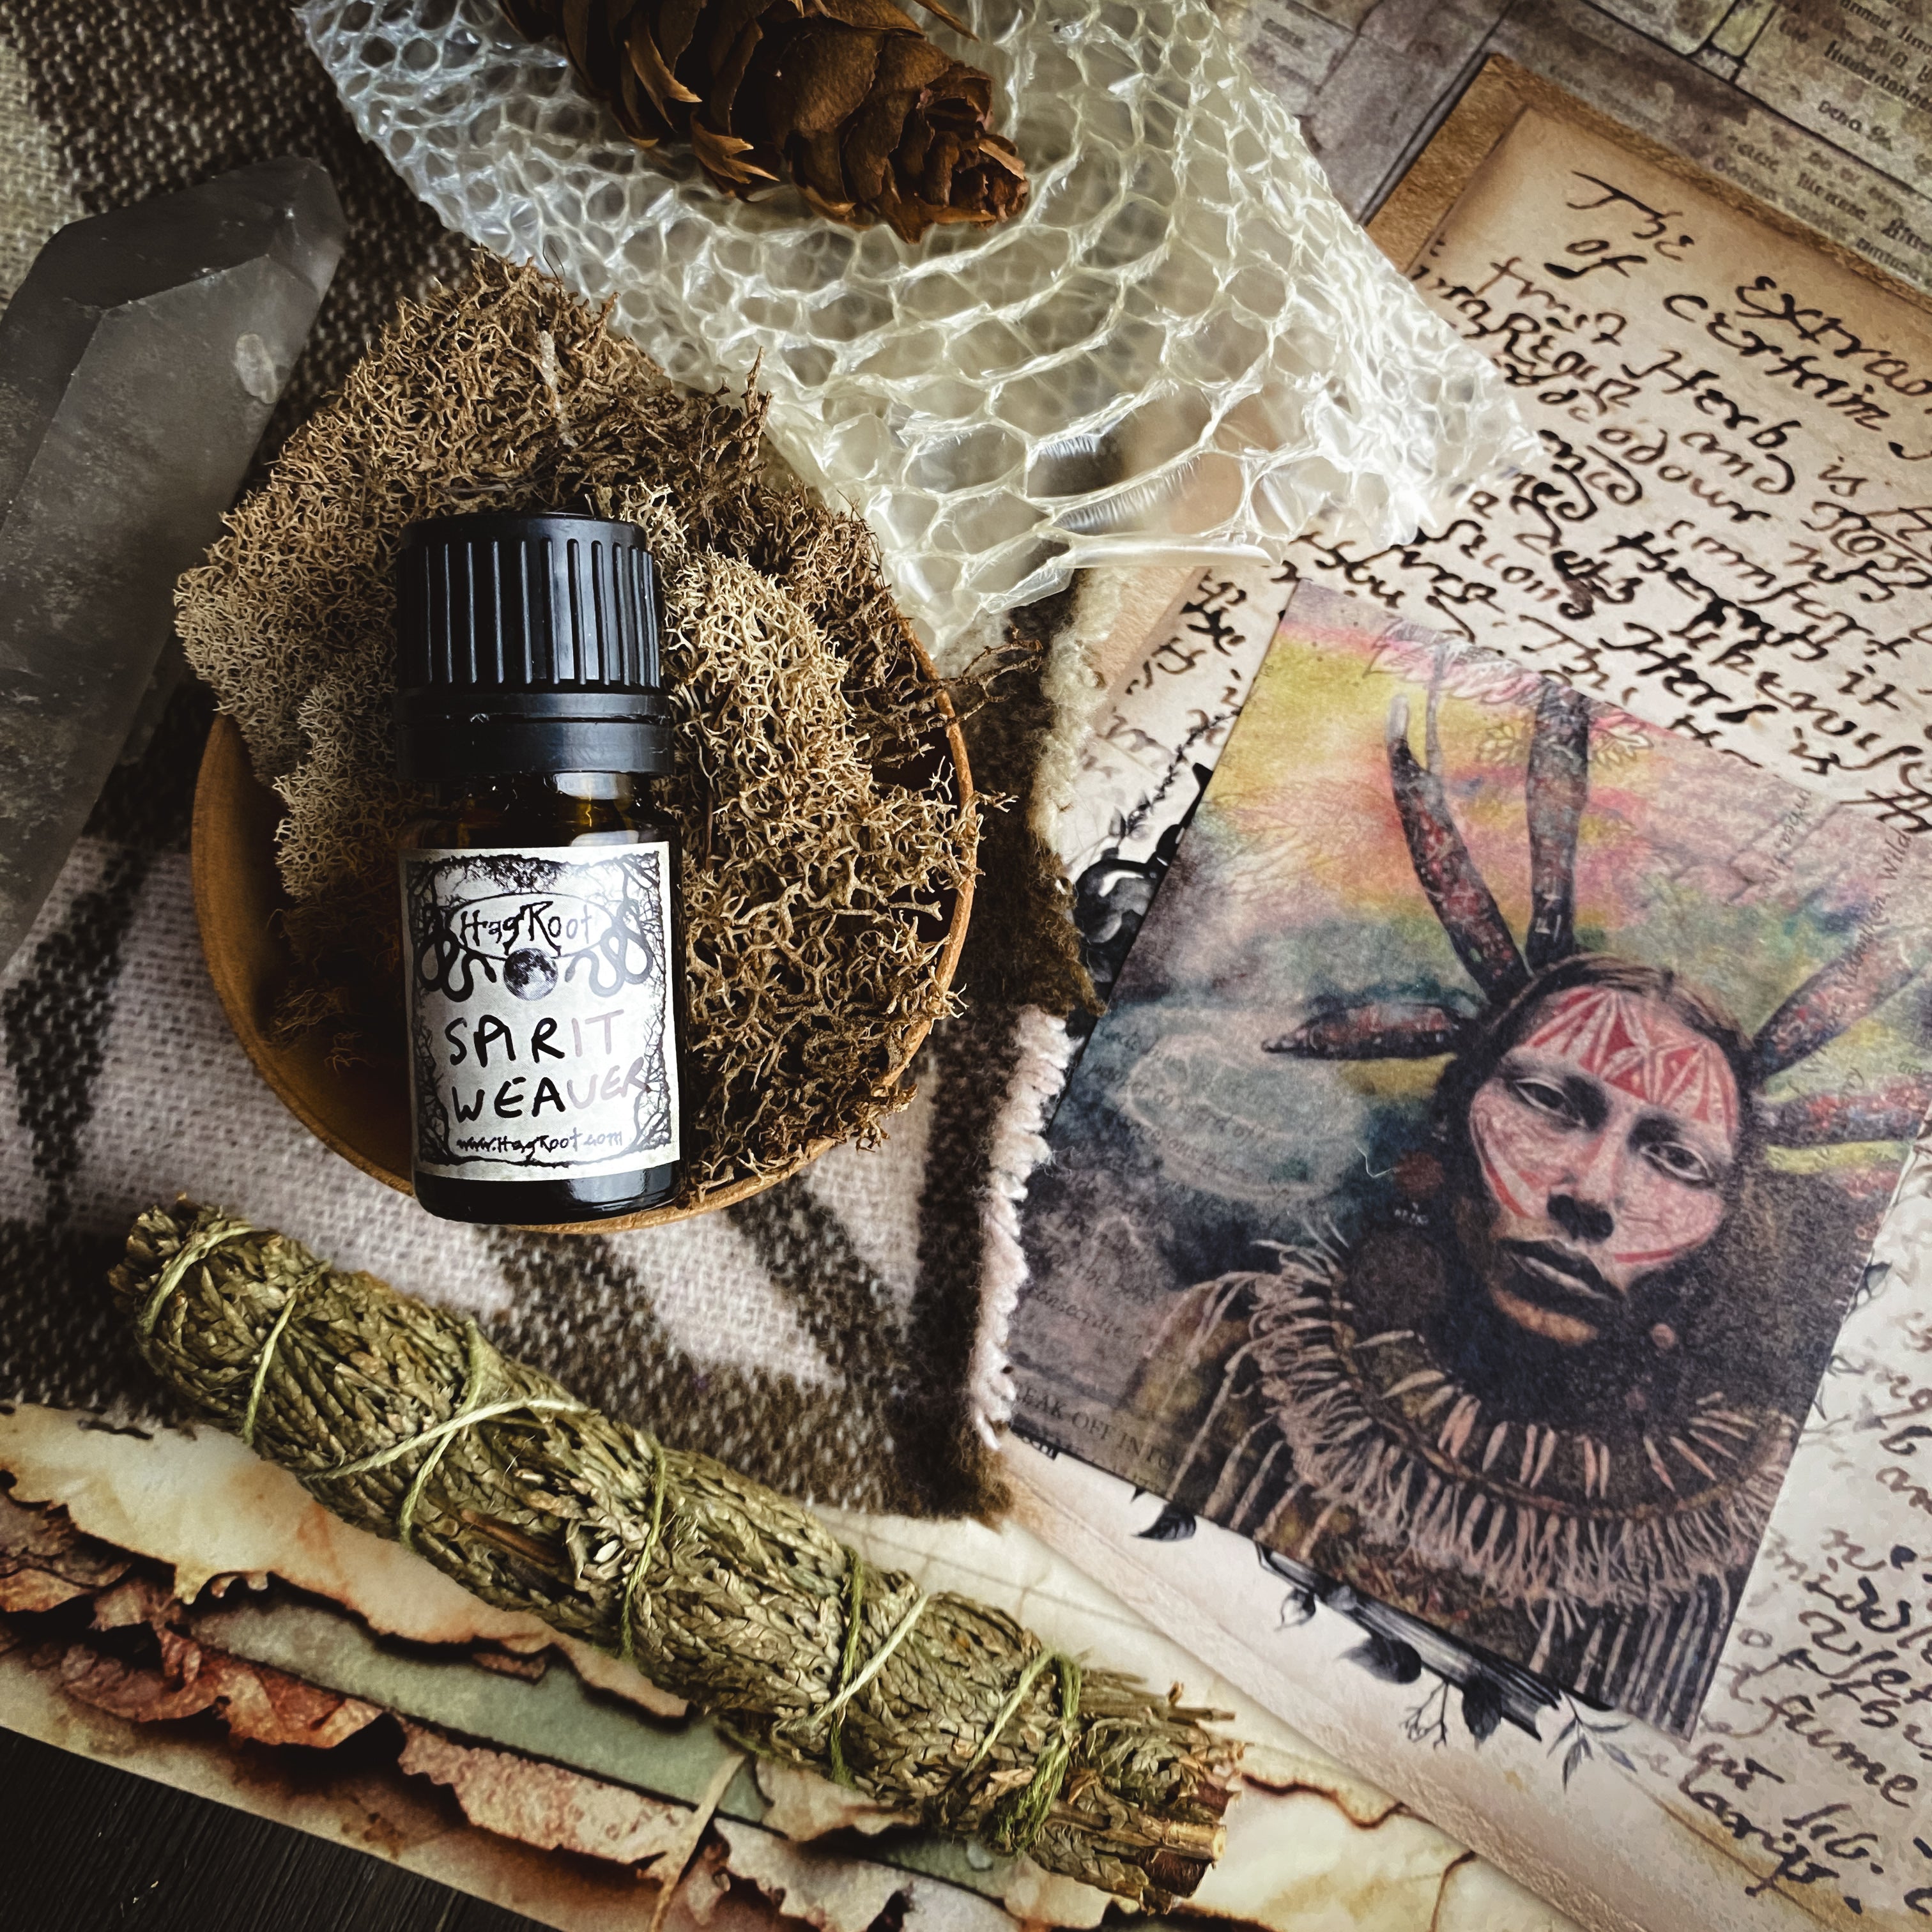 SPIRIT WEAVER-(Warm Spices, Fresh Baked Offerings and Fire)-Perfume, Cologne, Anointing, Ritual Oil